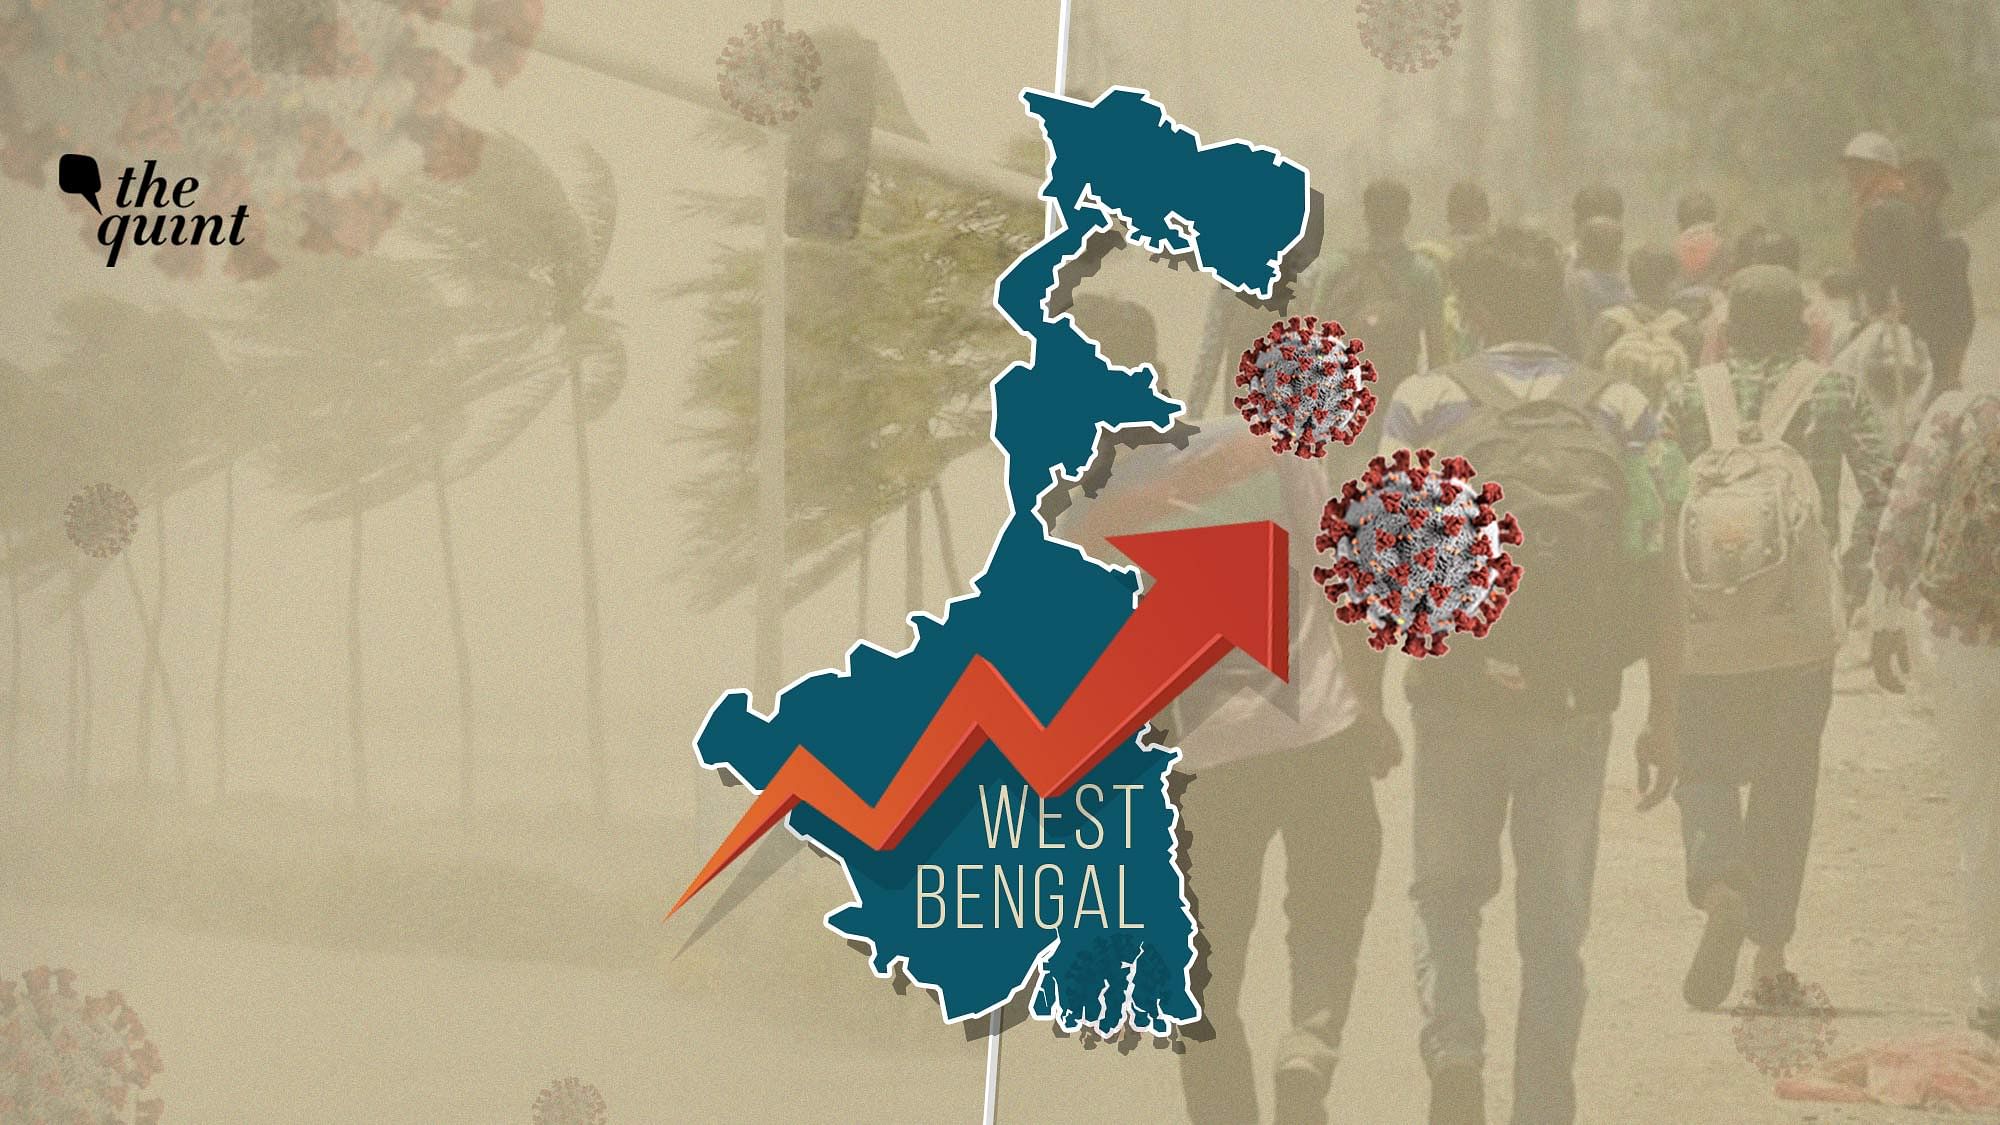 While the rise in the COVID positivity rate in West Bengal can be attributed to the significant rise in the state’s testing rates, certain indicators also point towards factors exacerbated by Amphan and the influx of migrants, which could be a cause of concern.